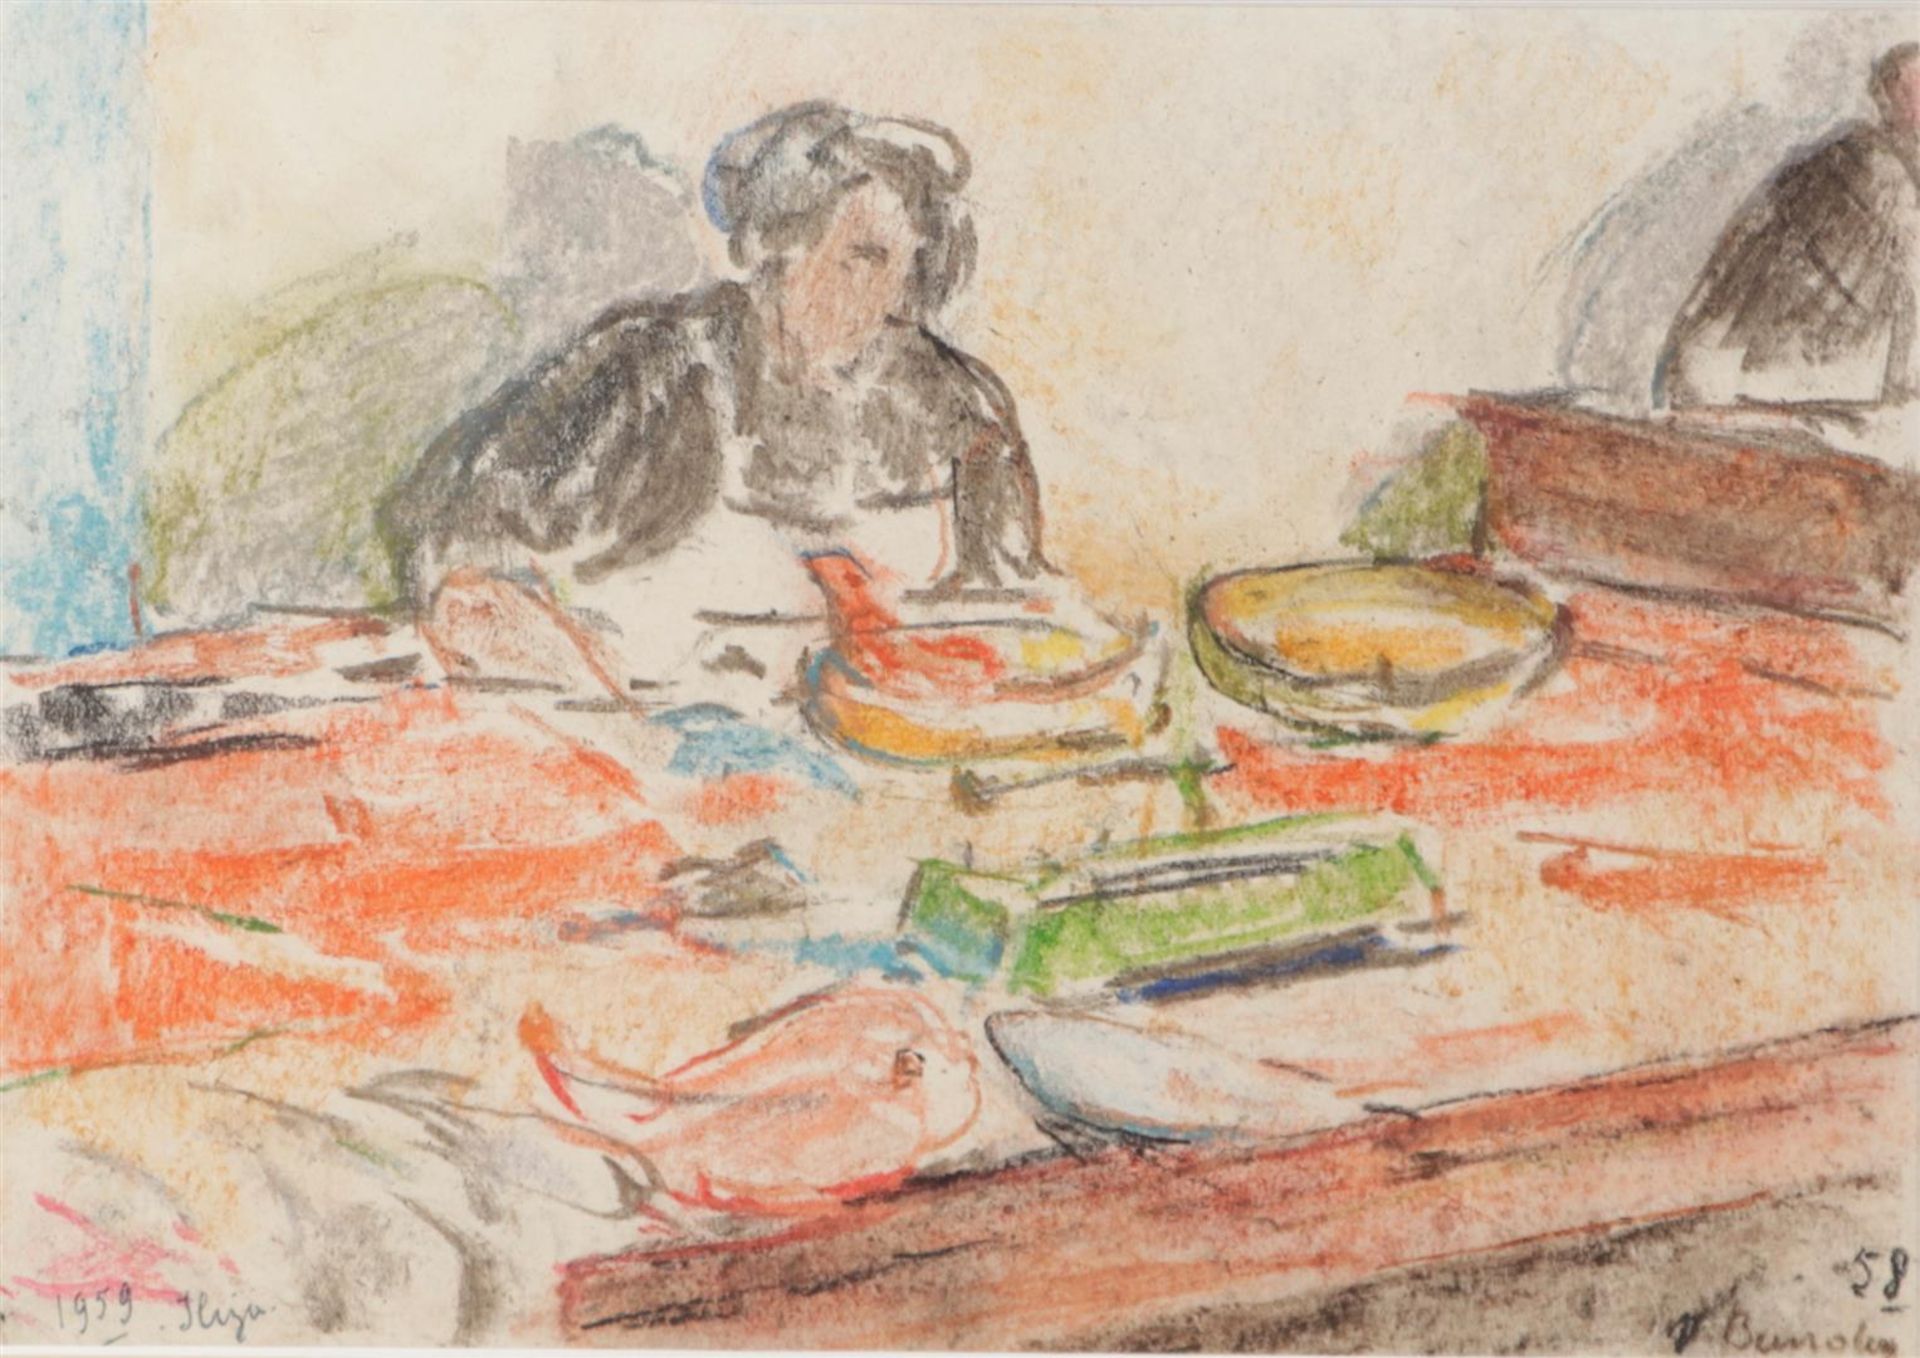 Alfonse van Beurden (Antwerp 1878 - 1961), Fish seller in Ibiza, signed and dated '58 (bottom right)